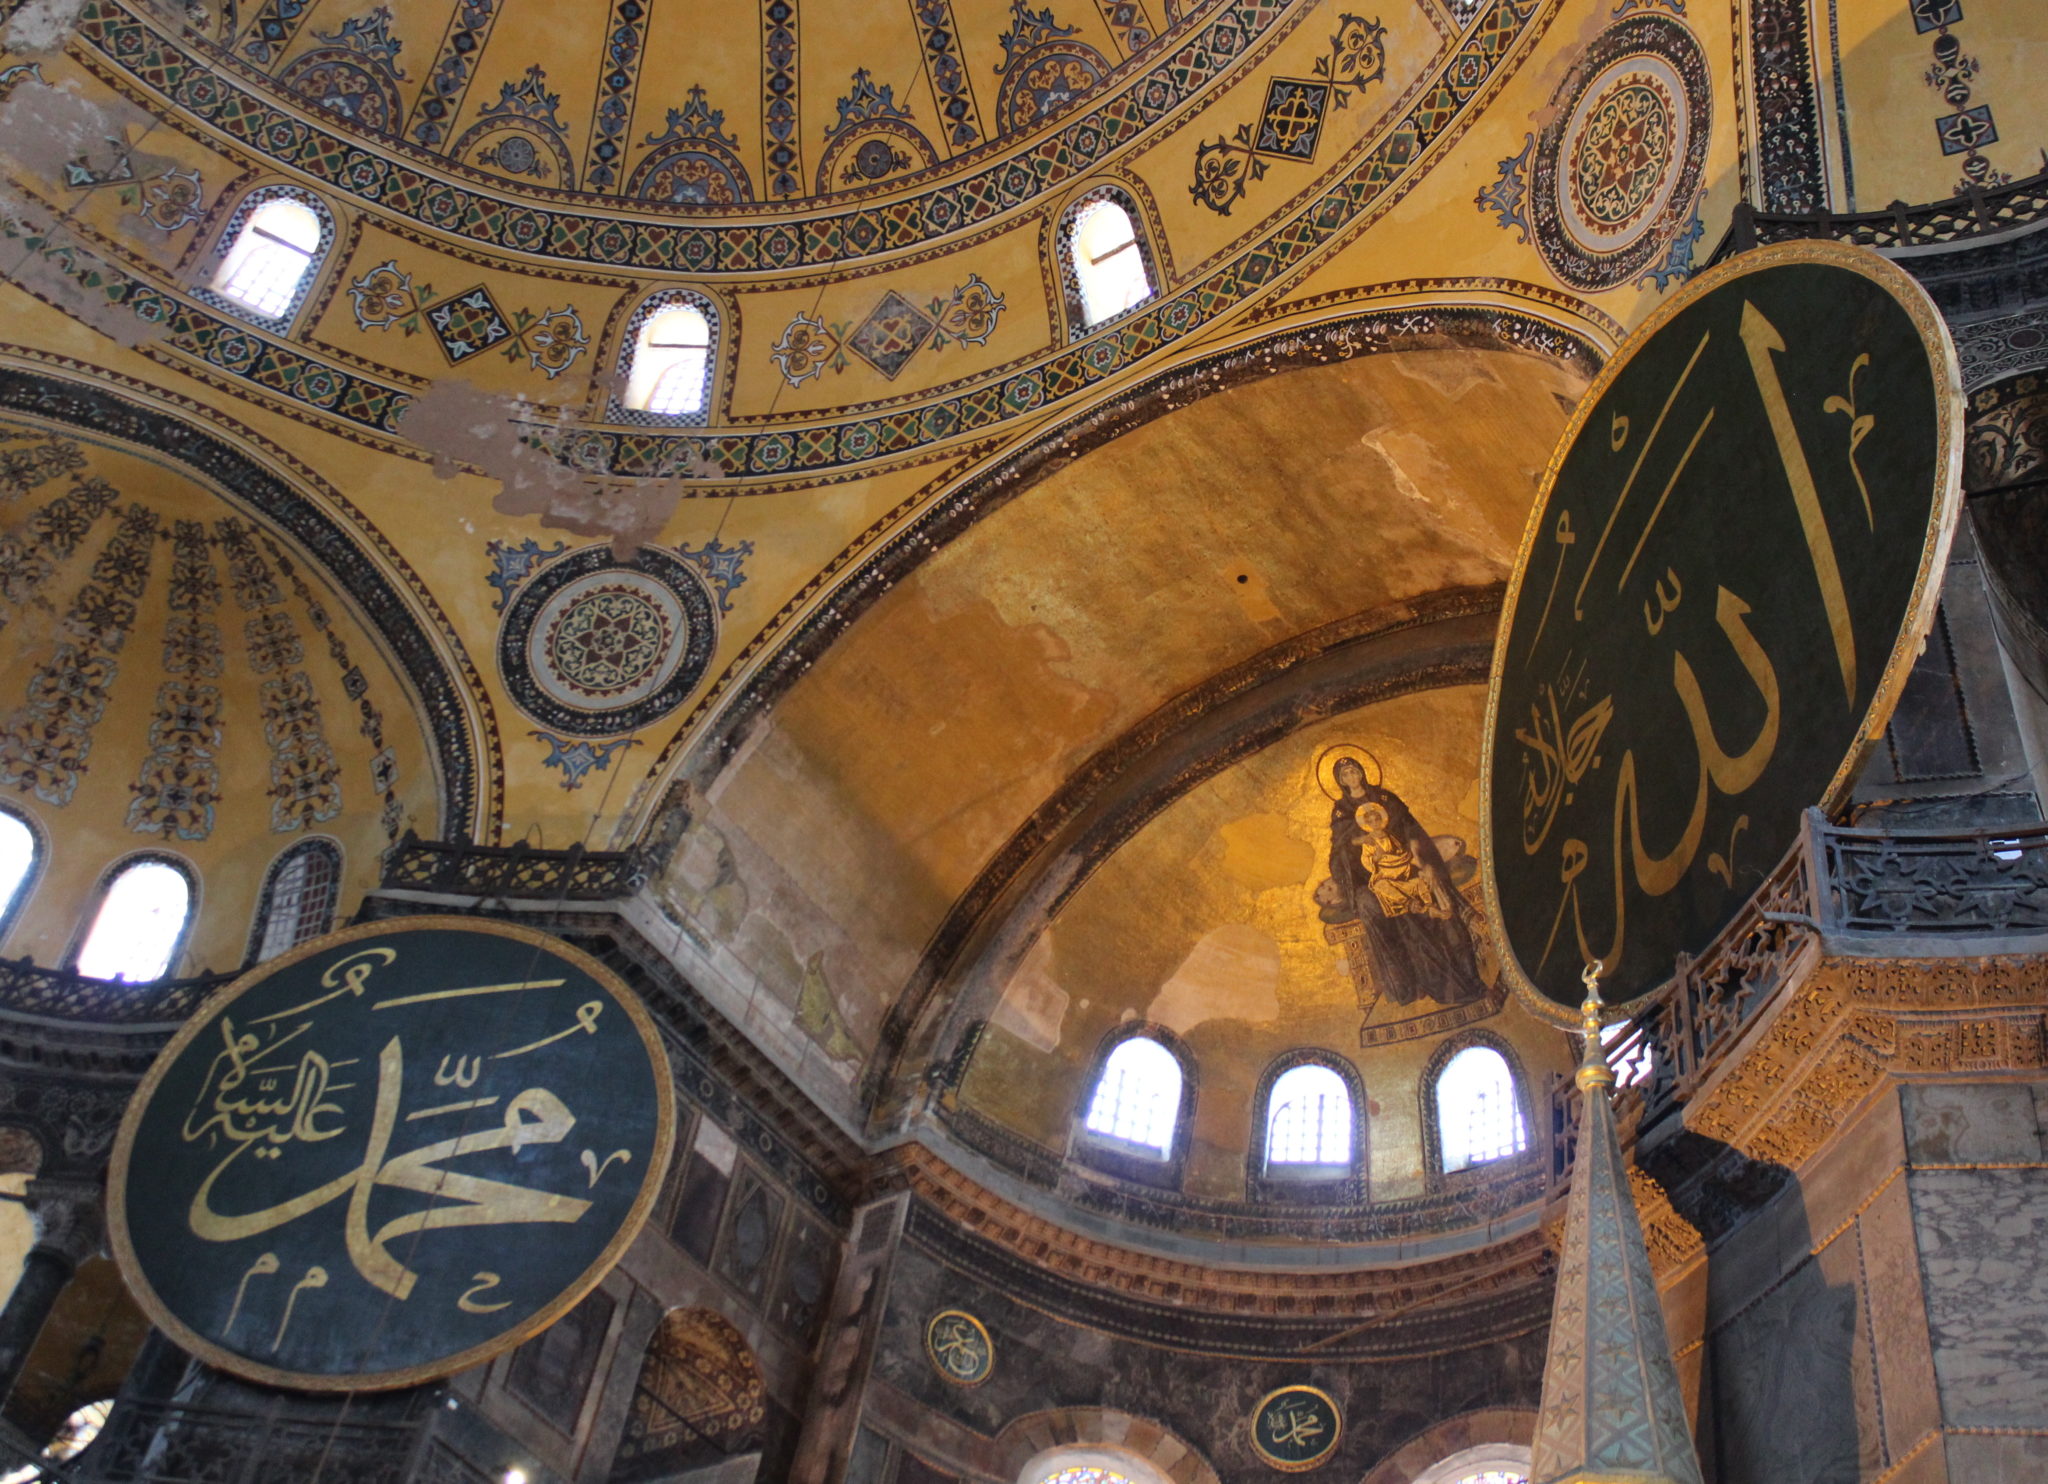 What would you do with 24 hours in Istanbul?